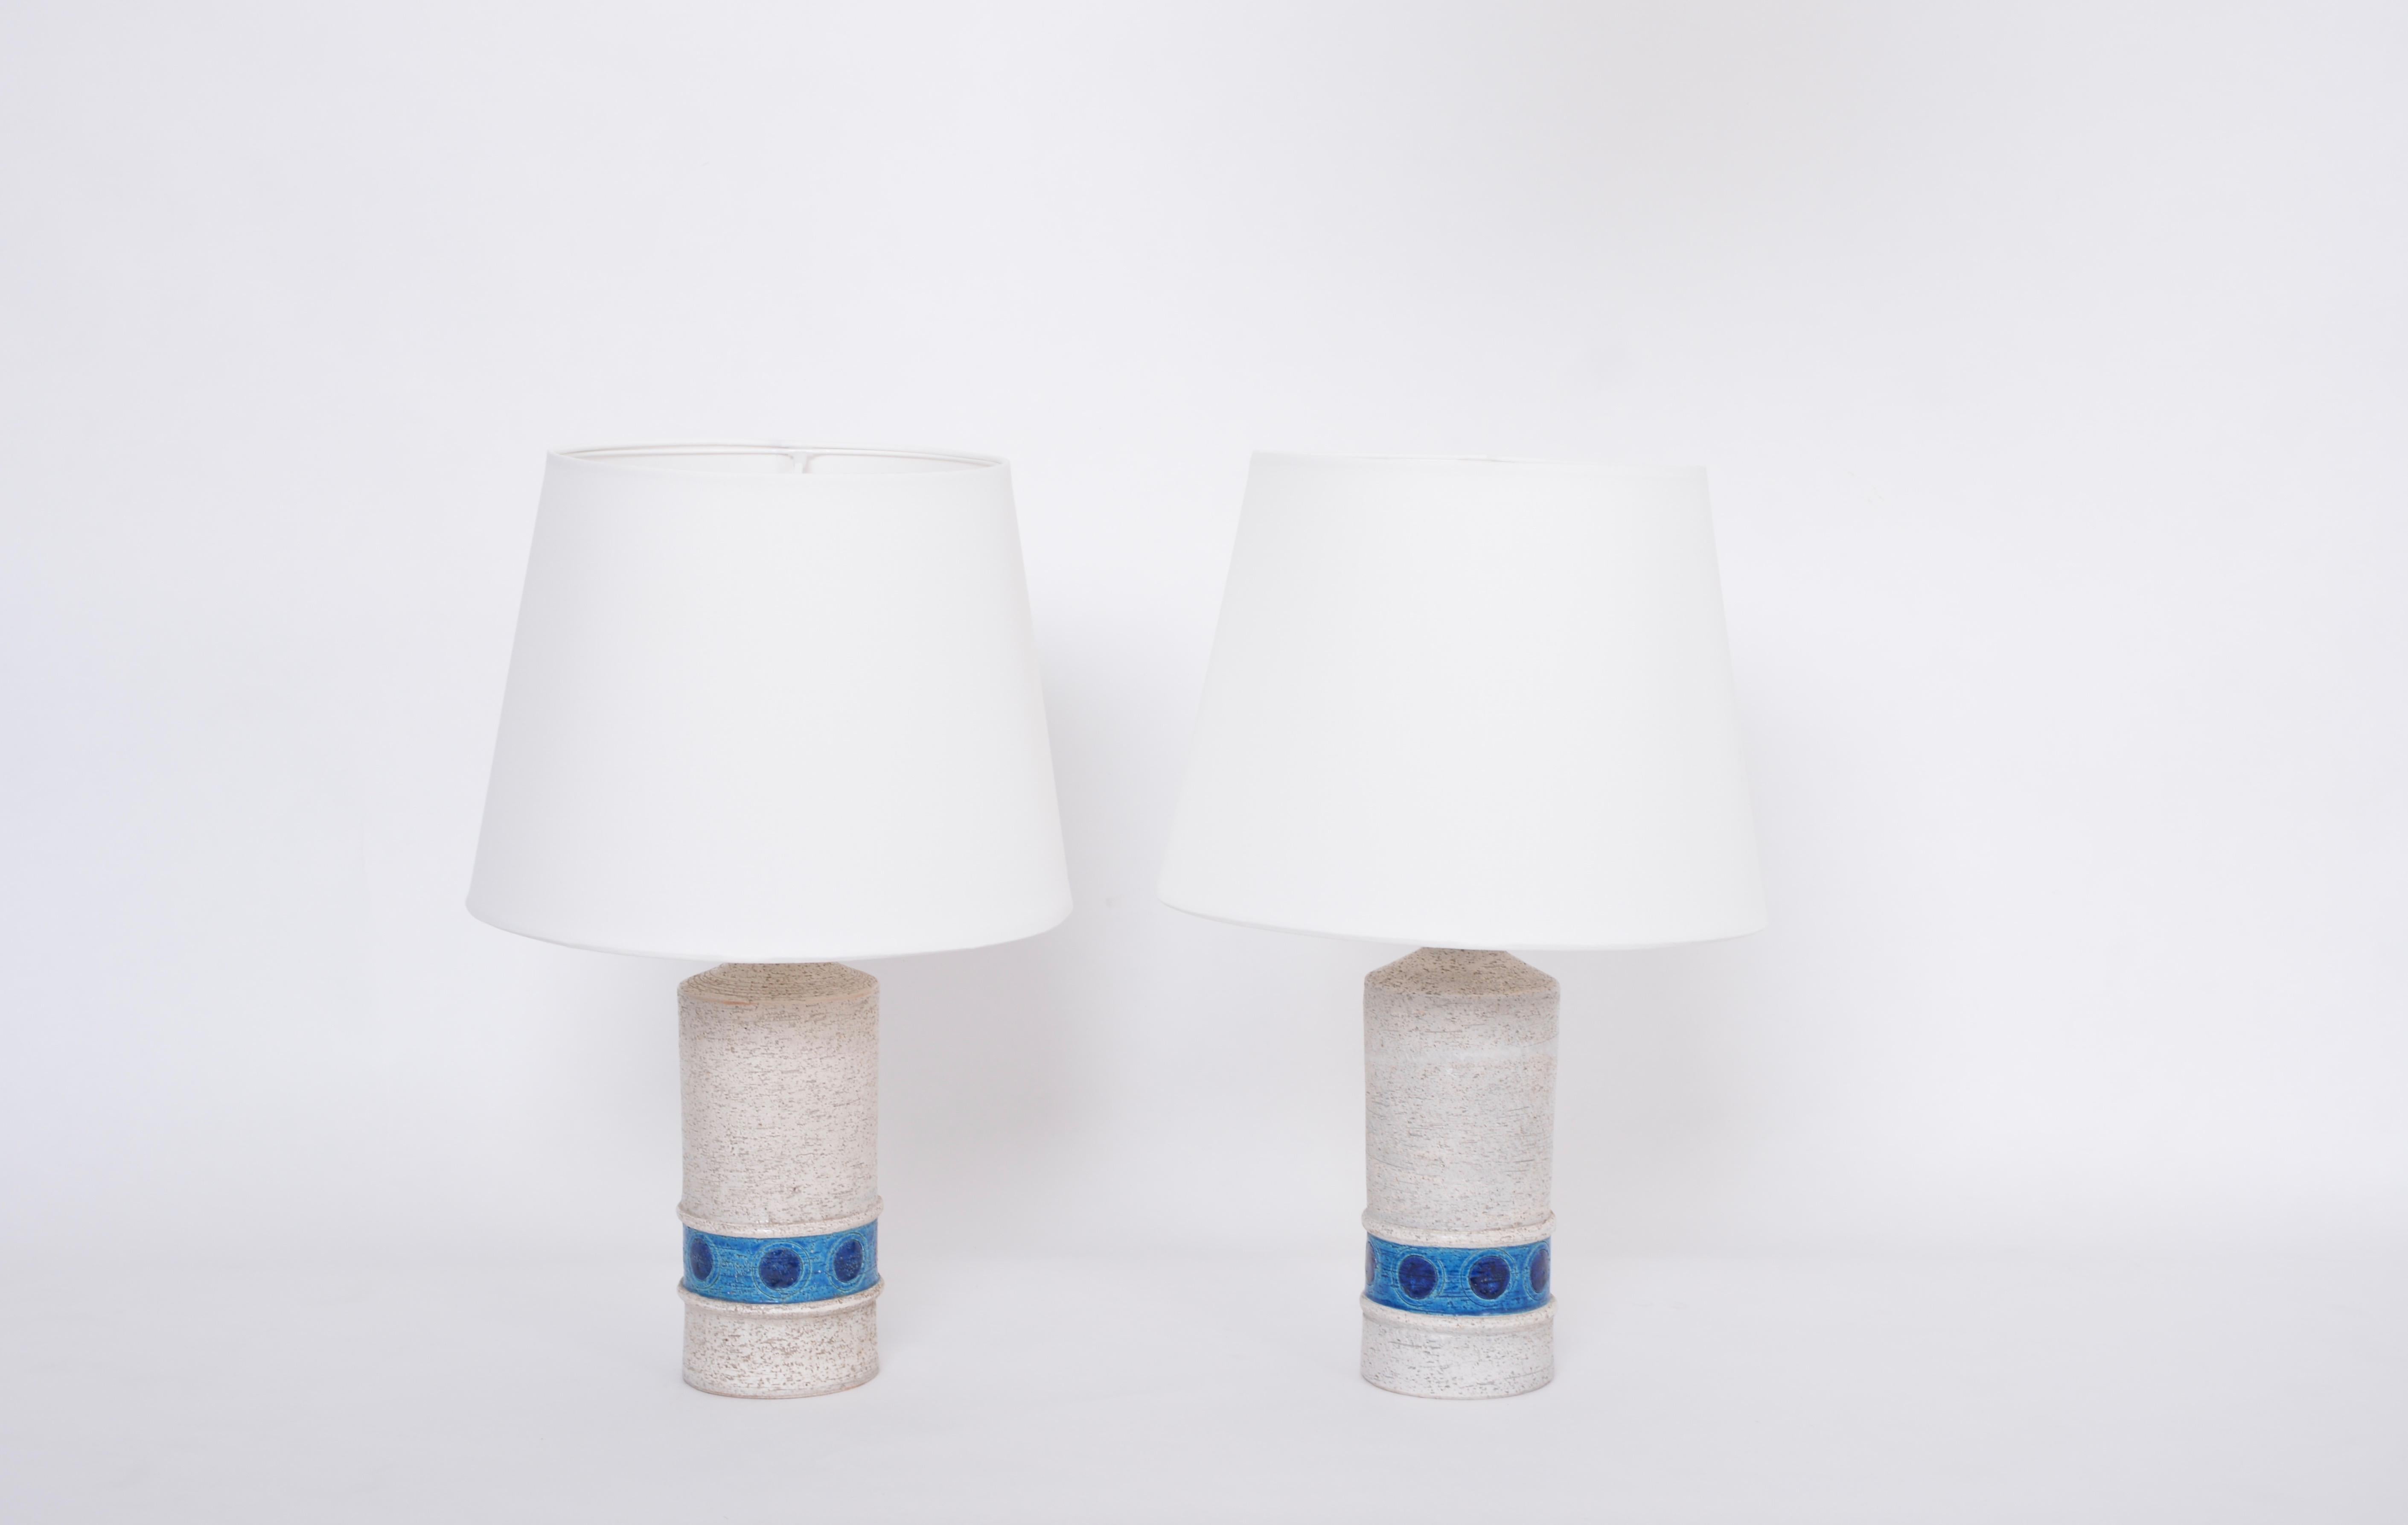 Pair of white Italian midcentury Ceramic table lamps by Aldo Londi for Bitossi
This stylish midcentury table lamp was designed during the 1960s by Aldo Londi and manufactured in Italy by renowned company Bitossi. The handcrafted lamp bases are of